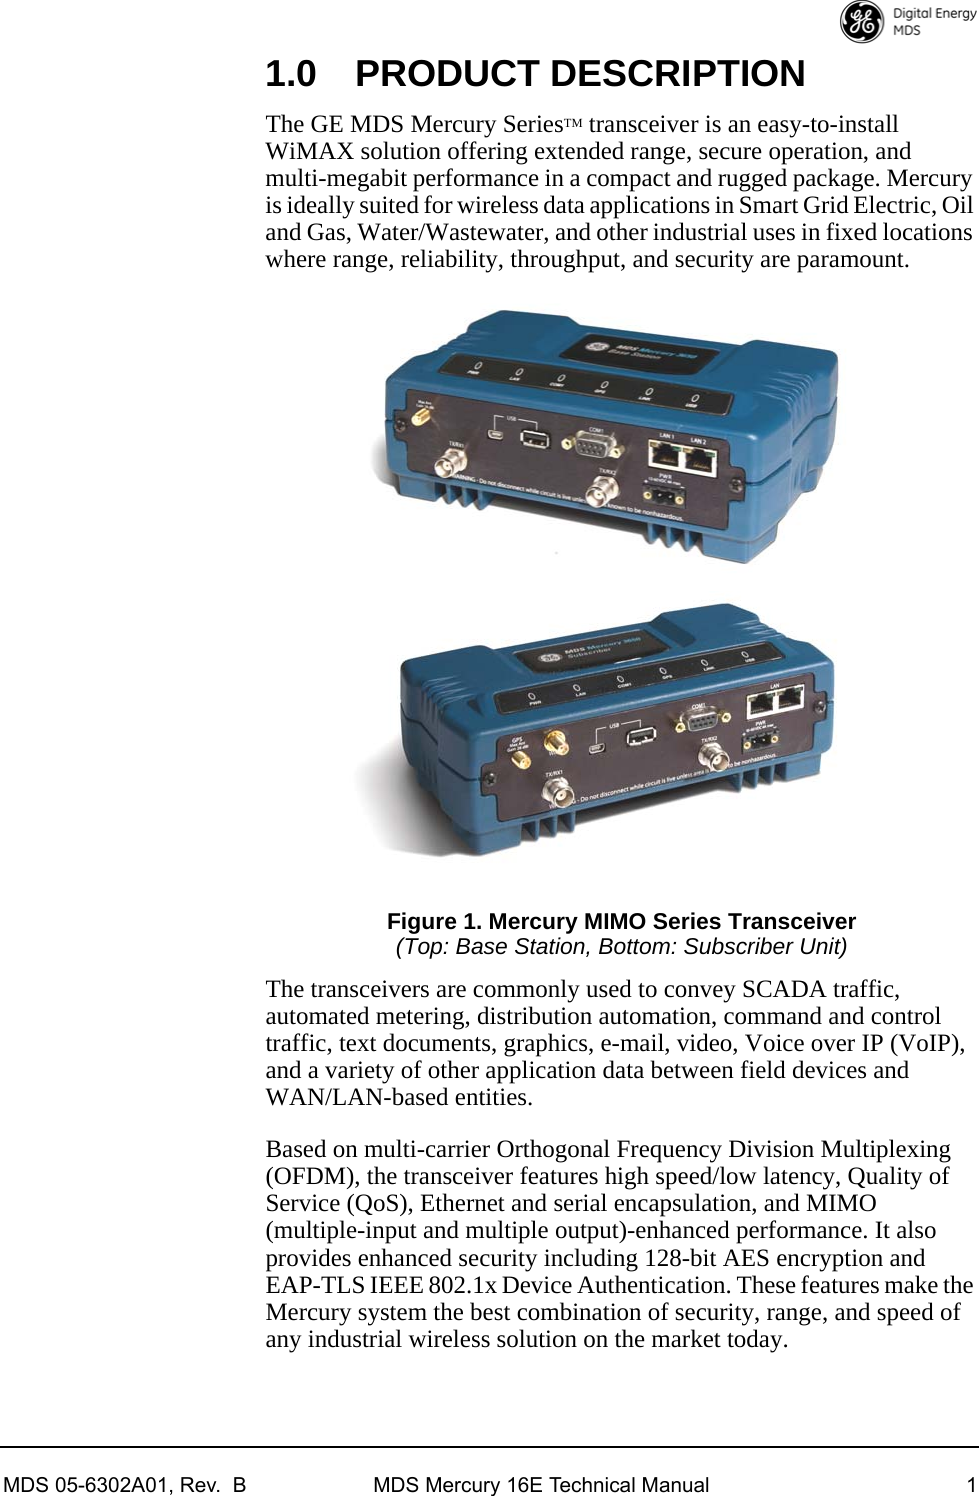 MDS 05-6302A01, Rev.  B MDS Mercury 16E Technical Manual 11.0 PRODUCT DESCRIPTIONThe GE MDS Mercury SeriesTM transceiver is an easy-to-install WiMAX solution offering extended range, secure operation, and multi-megabit performance in a compact and rugged package. Mercury is ideally suited for wireless data applications in Smart Grid Electric, Oil and Gas, Water/Wastewater, and other industrial uses in fixed locations where range, reliability, throughput, and security are paramount.Figure 1. Mercury MIMO Series Transceiver(Top: Base Station, Bottom: Subscriber Unit)The transceivers are commonly used to convey SCADA traffic, automated metering, distribution automation, command and control traffic, text documents, graphics, e-mail, video, Voice over IP (VoIP), and a variety of other application data between field devices and WAN/LAN-based entities.Based on multi-carrier Orthogonal Frequency Division Multiplexing (OFDM), the transceiver features high speed/low latency, Quality of Service (QoS), Ethernet and serial encapsulation, and MIMO (multiple-input and multiple output)-enhanced performance. It also provides enhanced security including 128-bit AES encryption and EAP-TLS IEEE 802.1x Device Authentication. These features make the Mercury system the best combination of security, range, and speed of any industrial wireless solution on the market today.